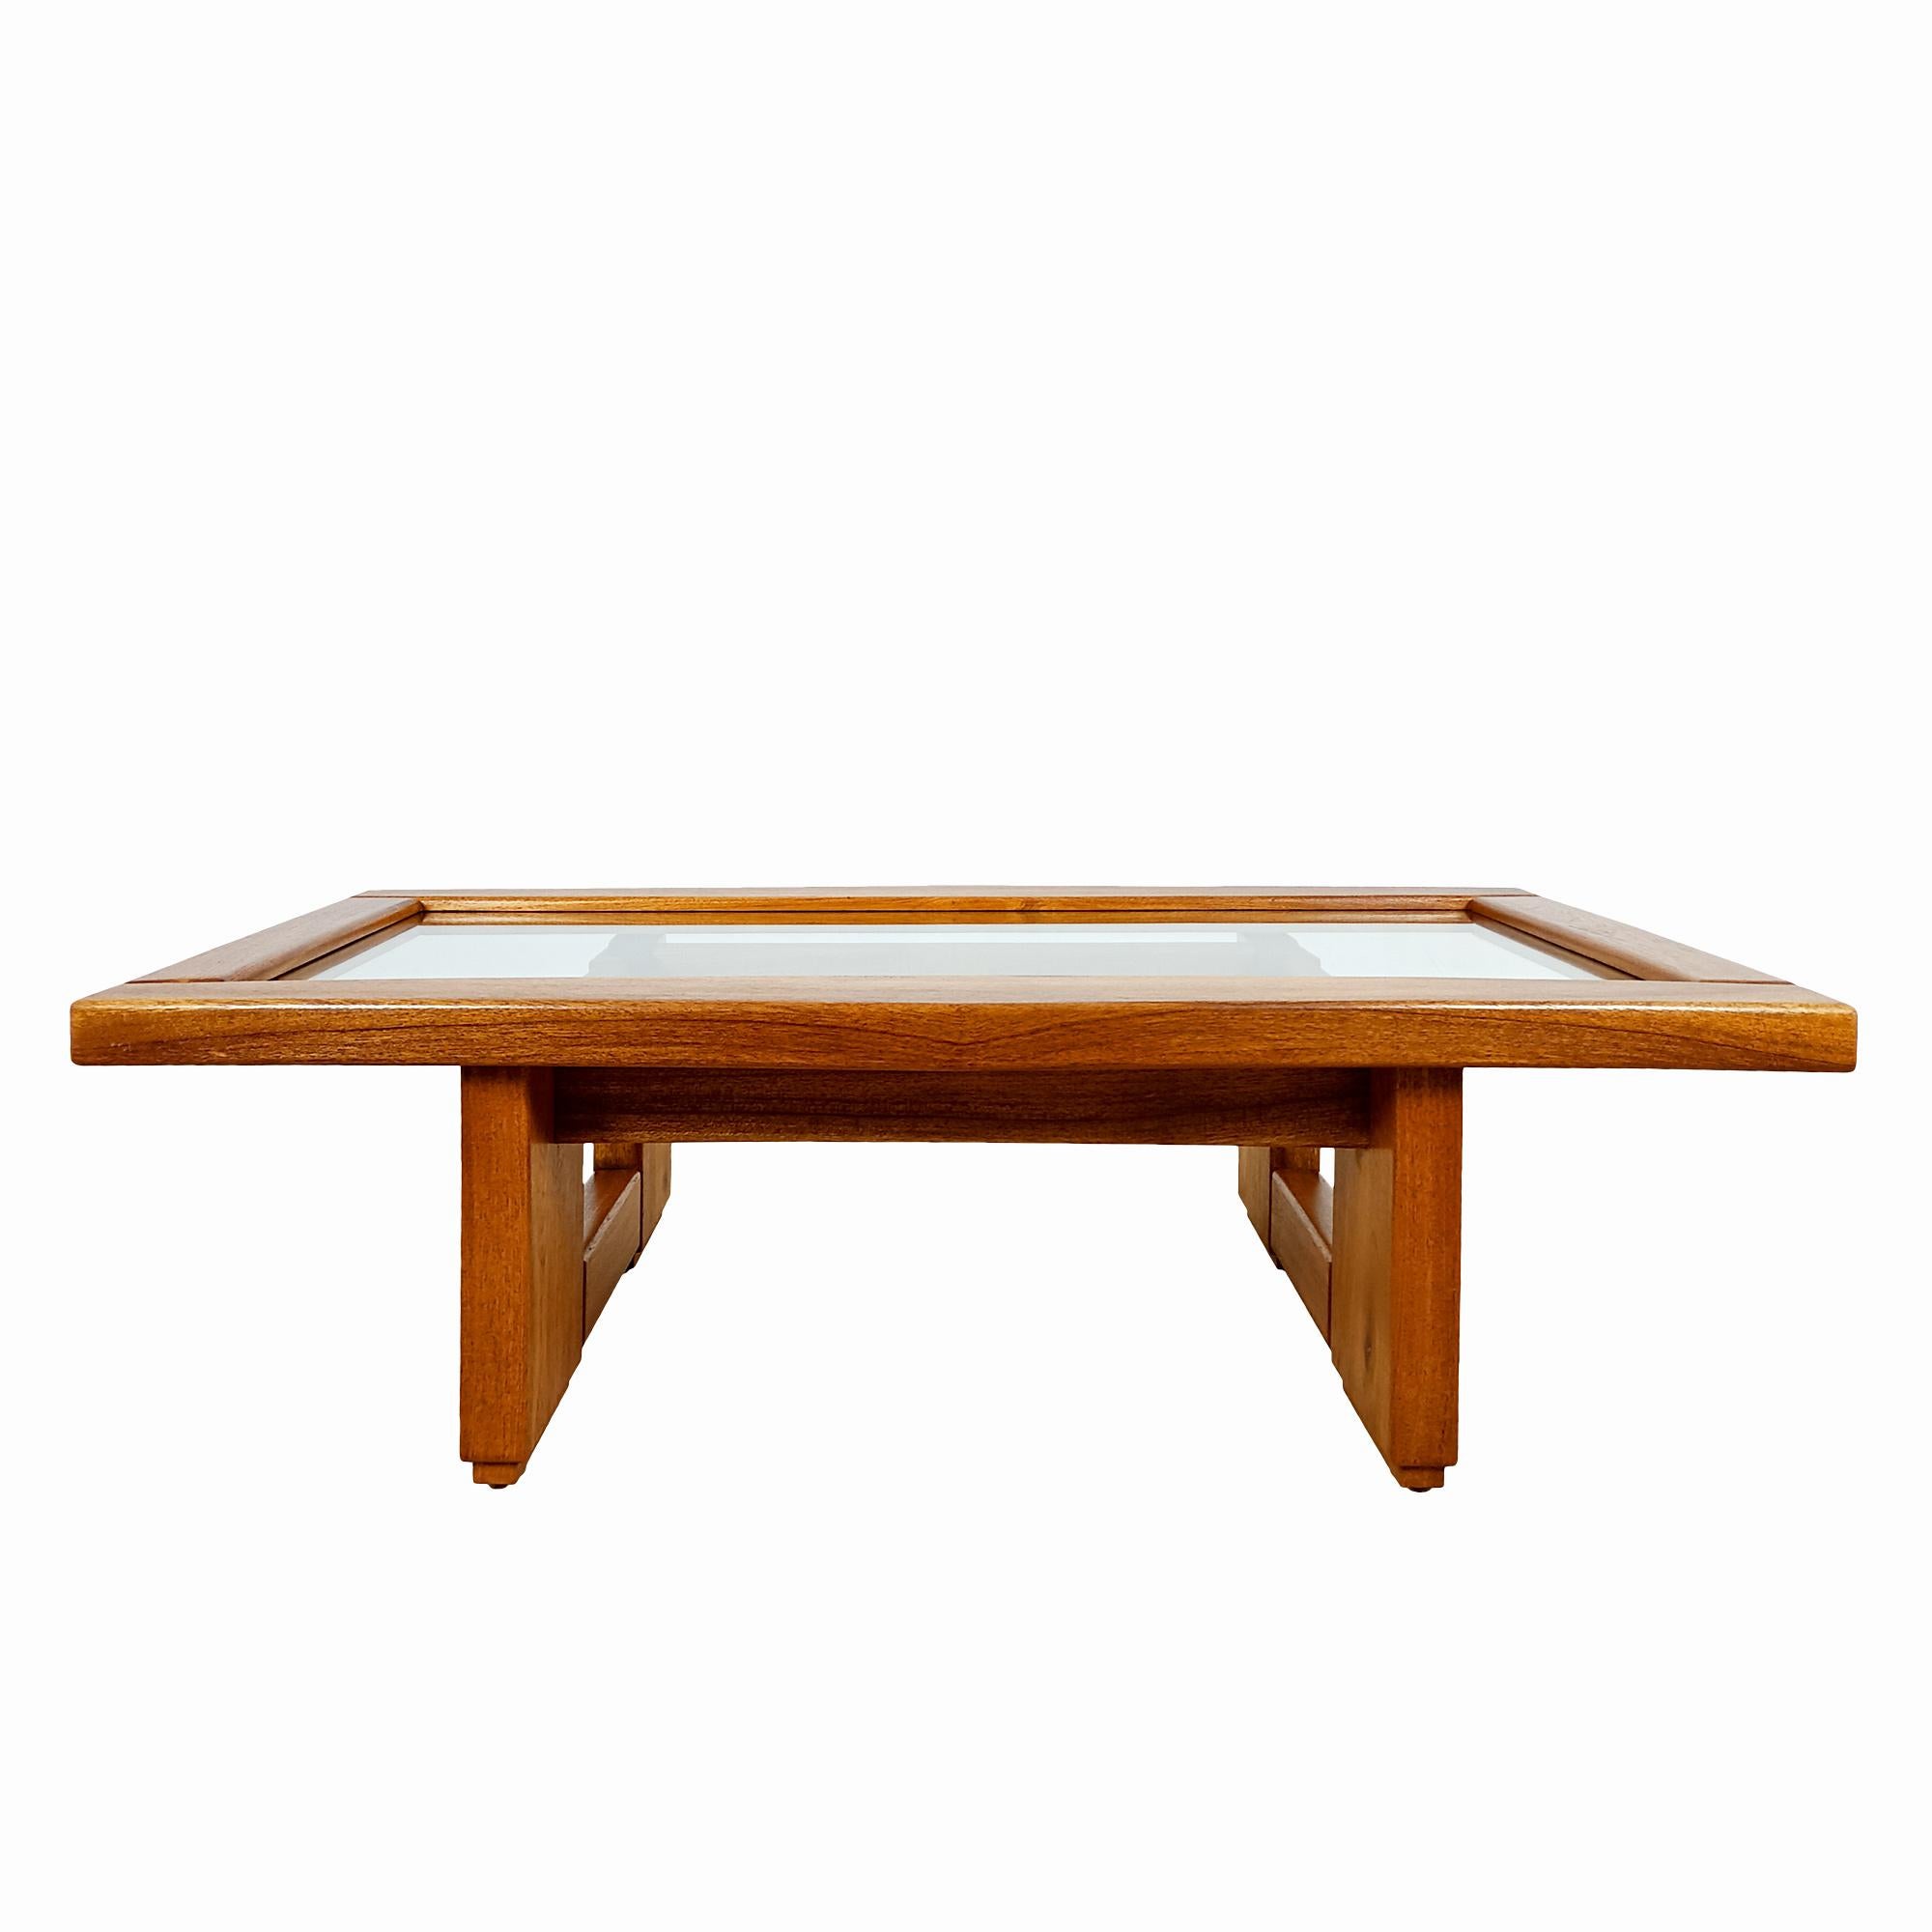 Coffee table in solid walnut and glass, shellac finish, excellent quality.
Maker: Maison Regain.

France c.1970